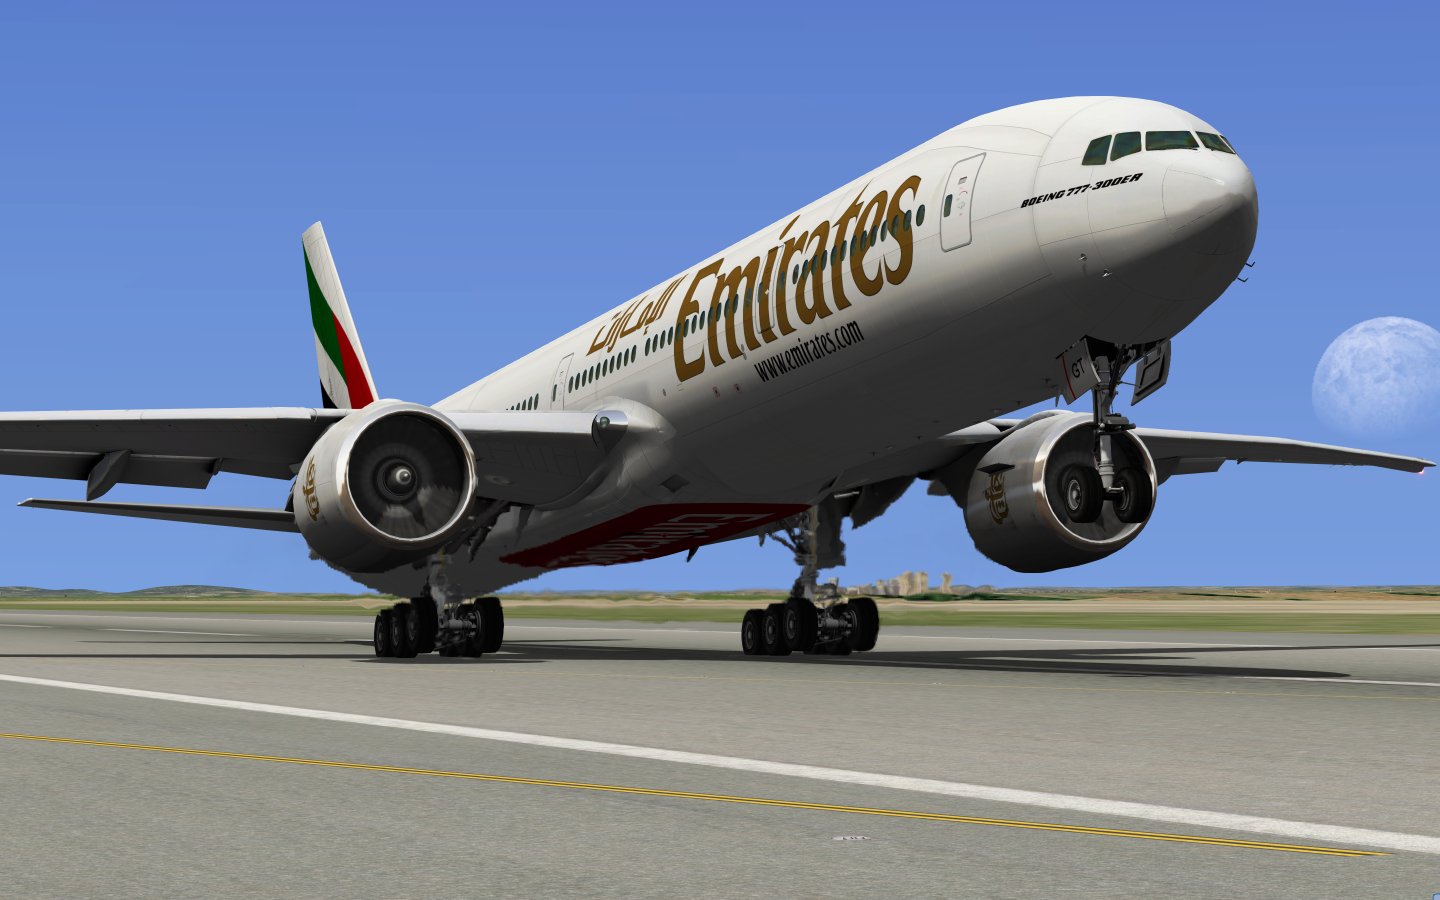 More information about "Emirates Boeing 777-300ER"